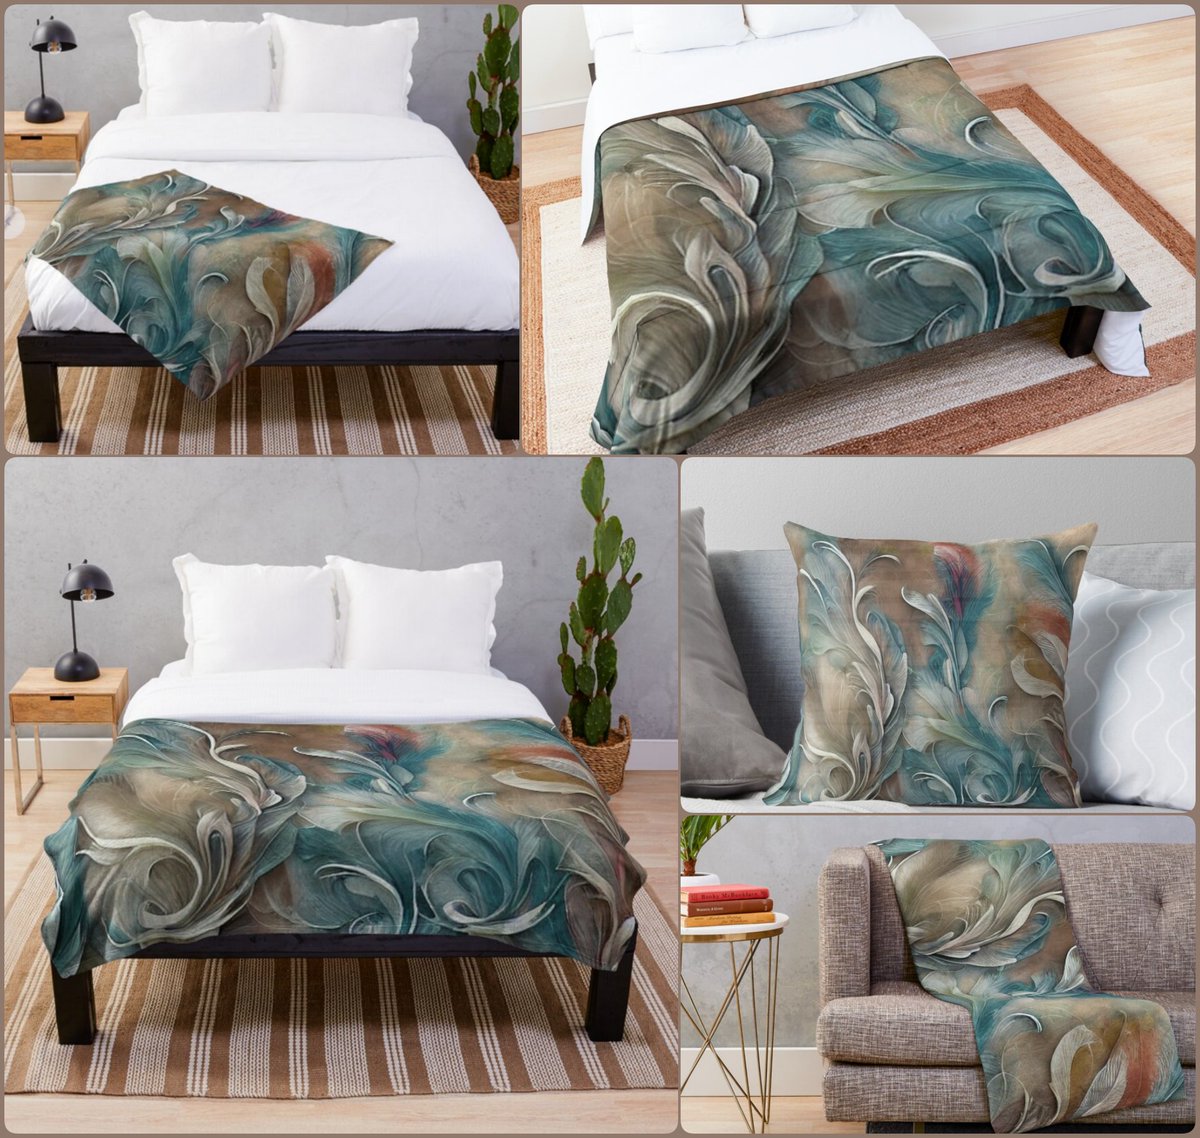 *SALE 35% Off* Lovely Mirage Throw Blanket & Throw Pillow~by Art Falaxy~ ~Charming Decor~ #accents #homedecor #art #artfalaxy #bathmats #blankets #comforters #duvets #pillows #redbubble #shower #trendy #modern #gifts #FindYourThing redbubble.com/i/throw-blanke…